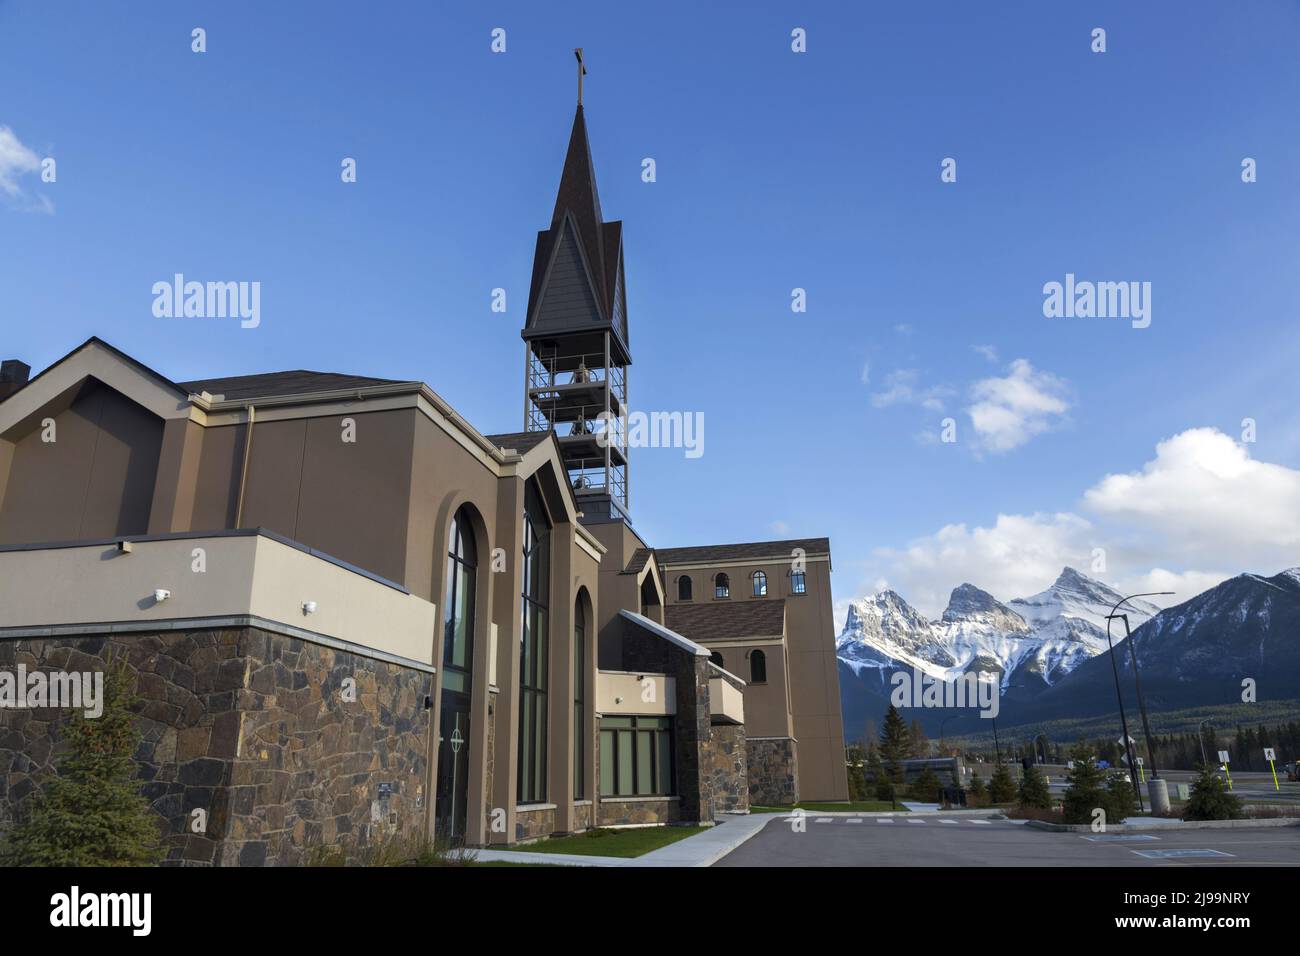 The Shrine Church of Our Lady of The Rockies.  Modern Roman Catholic Church Building Exterior in City of Canmore, Alberta Canadian Rocky Mountains Stock Photo